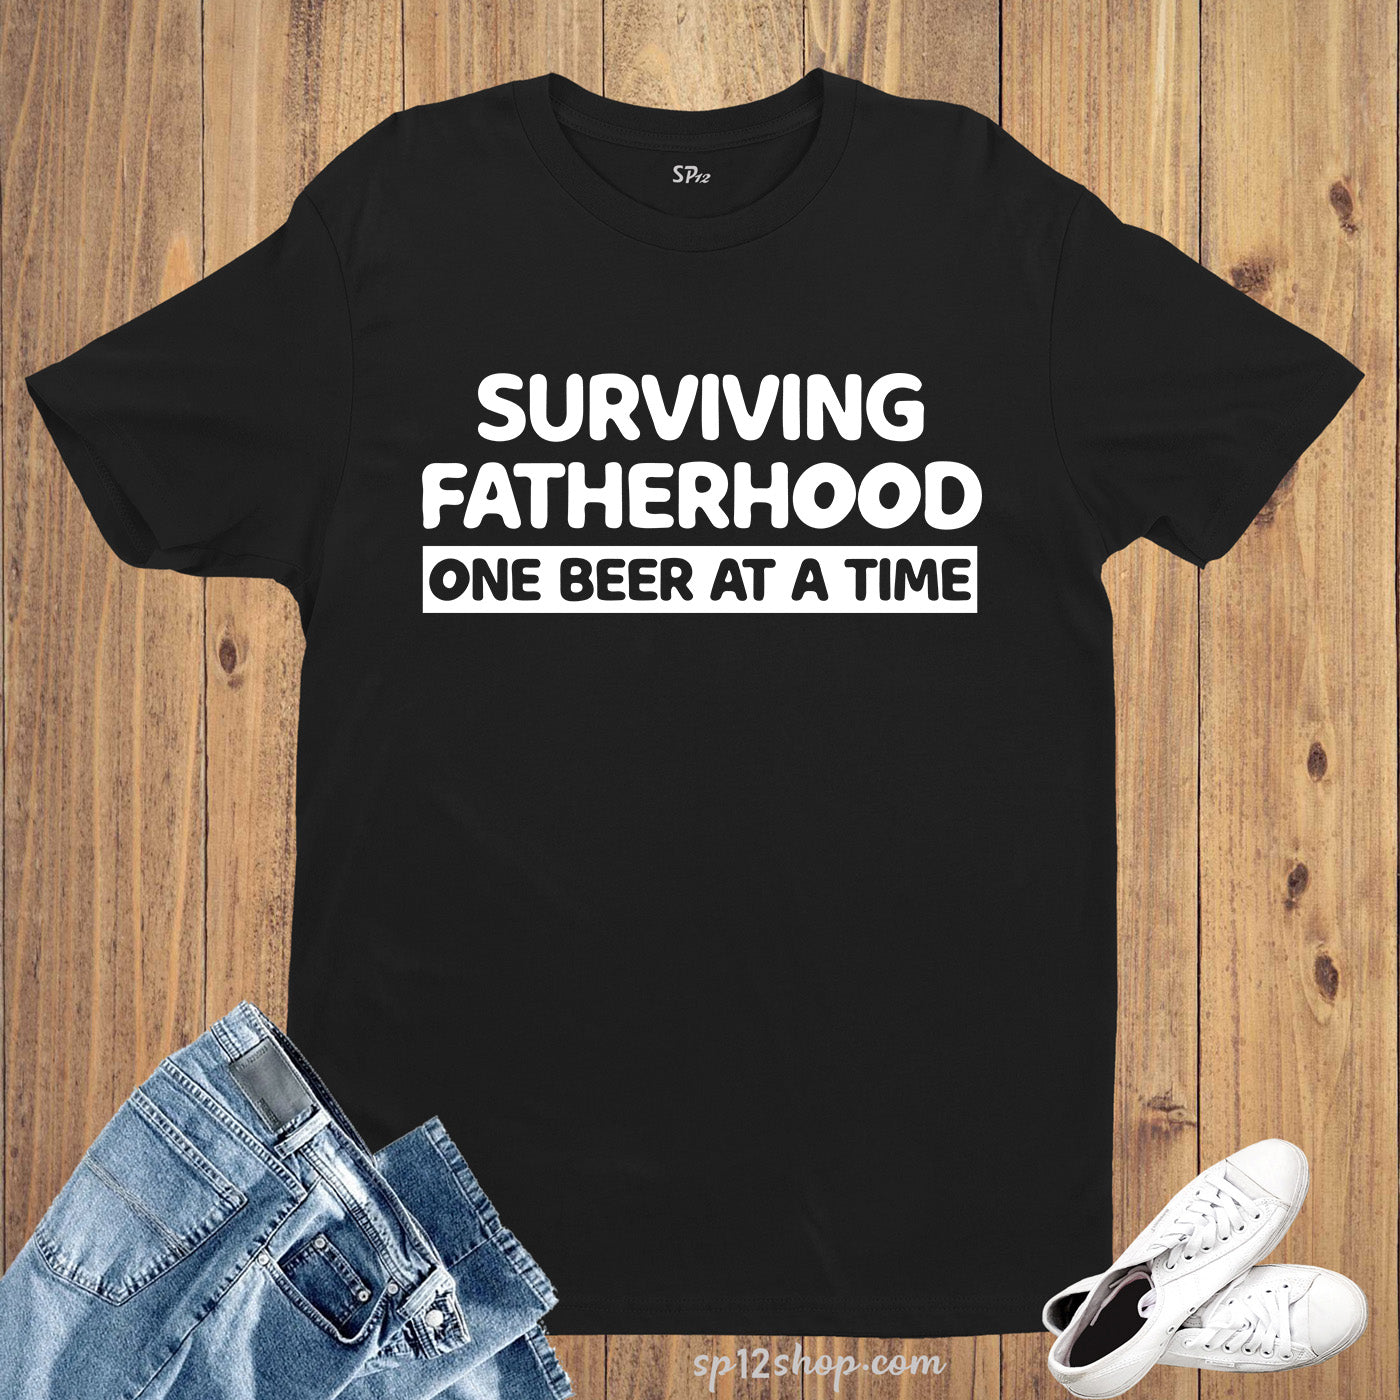 Surviving Fatherhood One Beer at a Time T Shirt